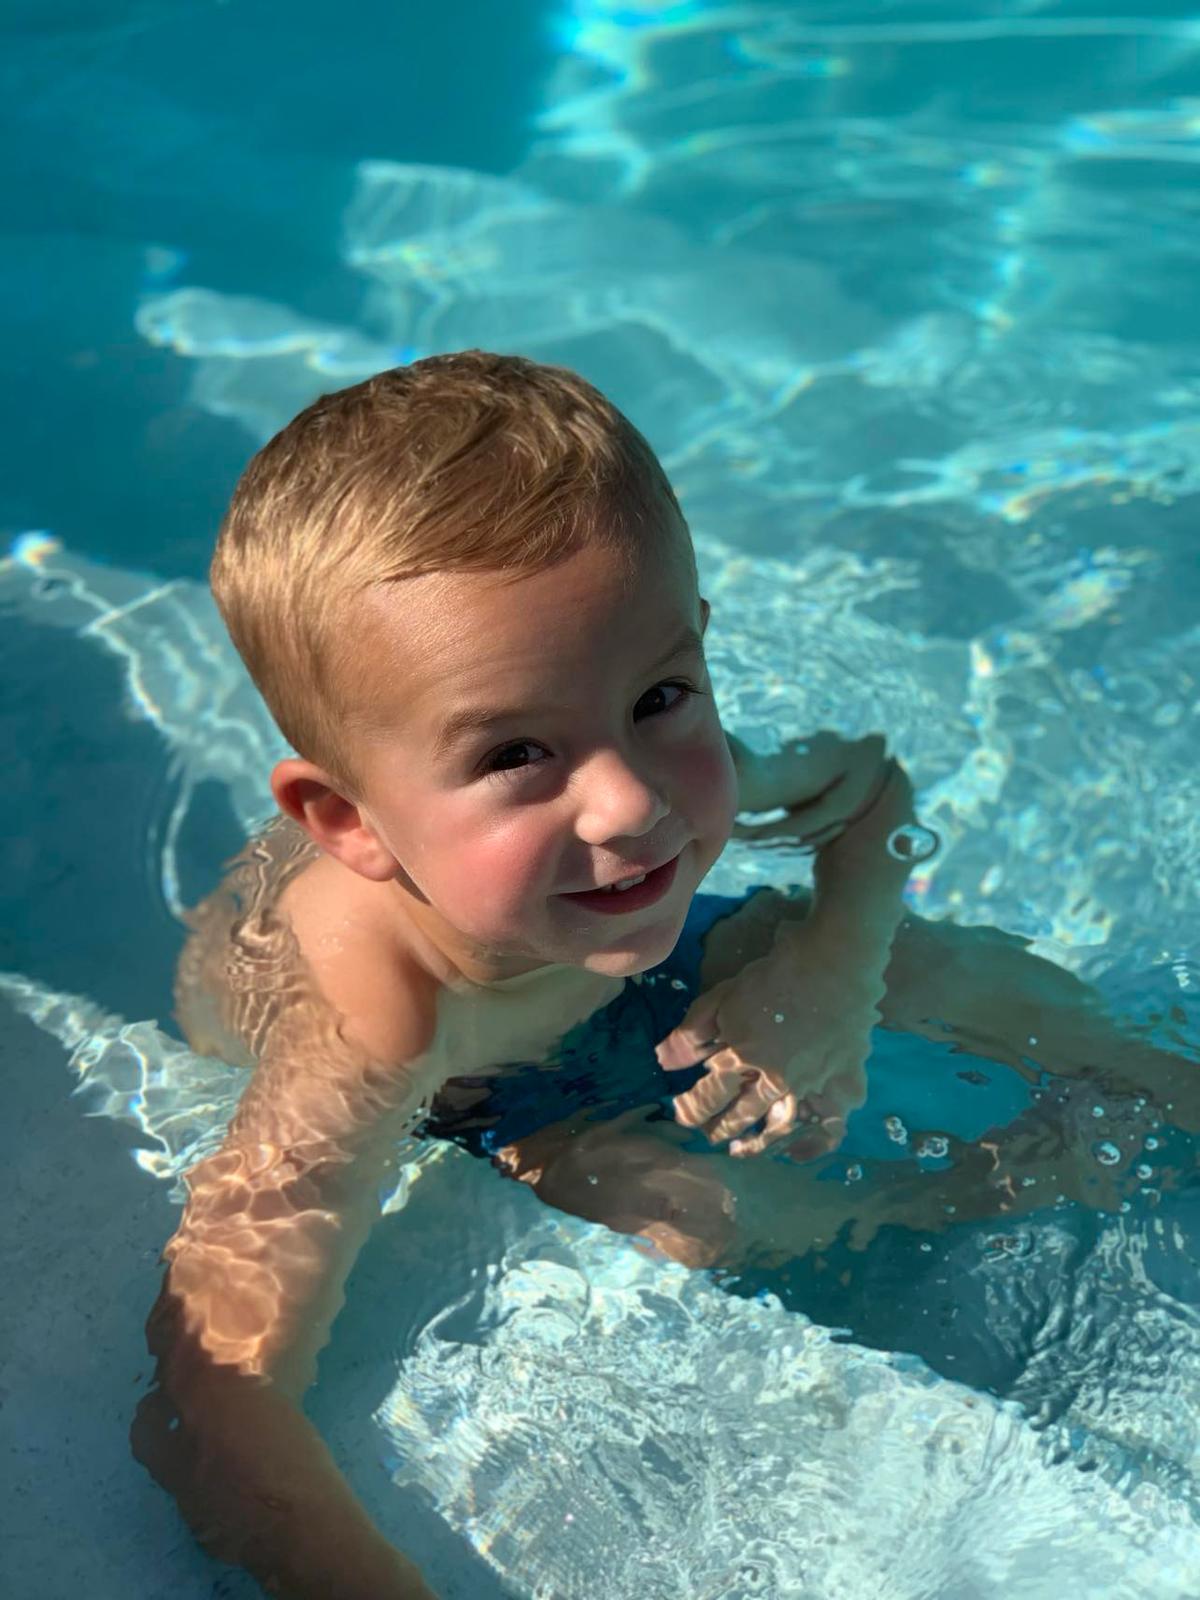 Max, now 6, survived a near-fatal drowning accident in 2019. He says Jesus had held him in the pool that day. (Courtesy of Courtney McKee)